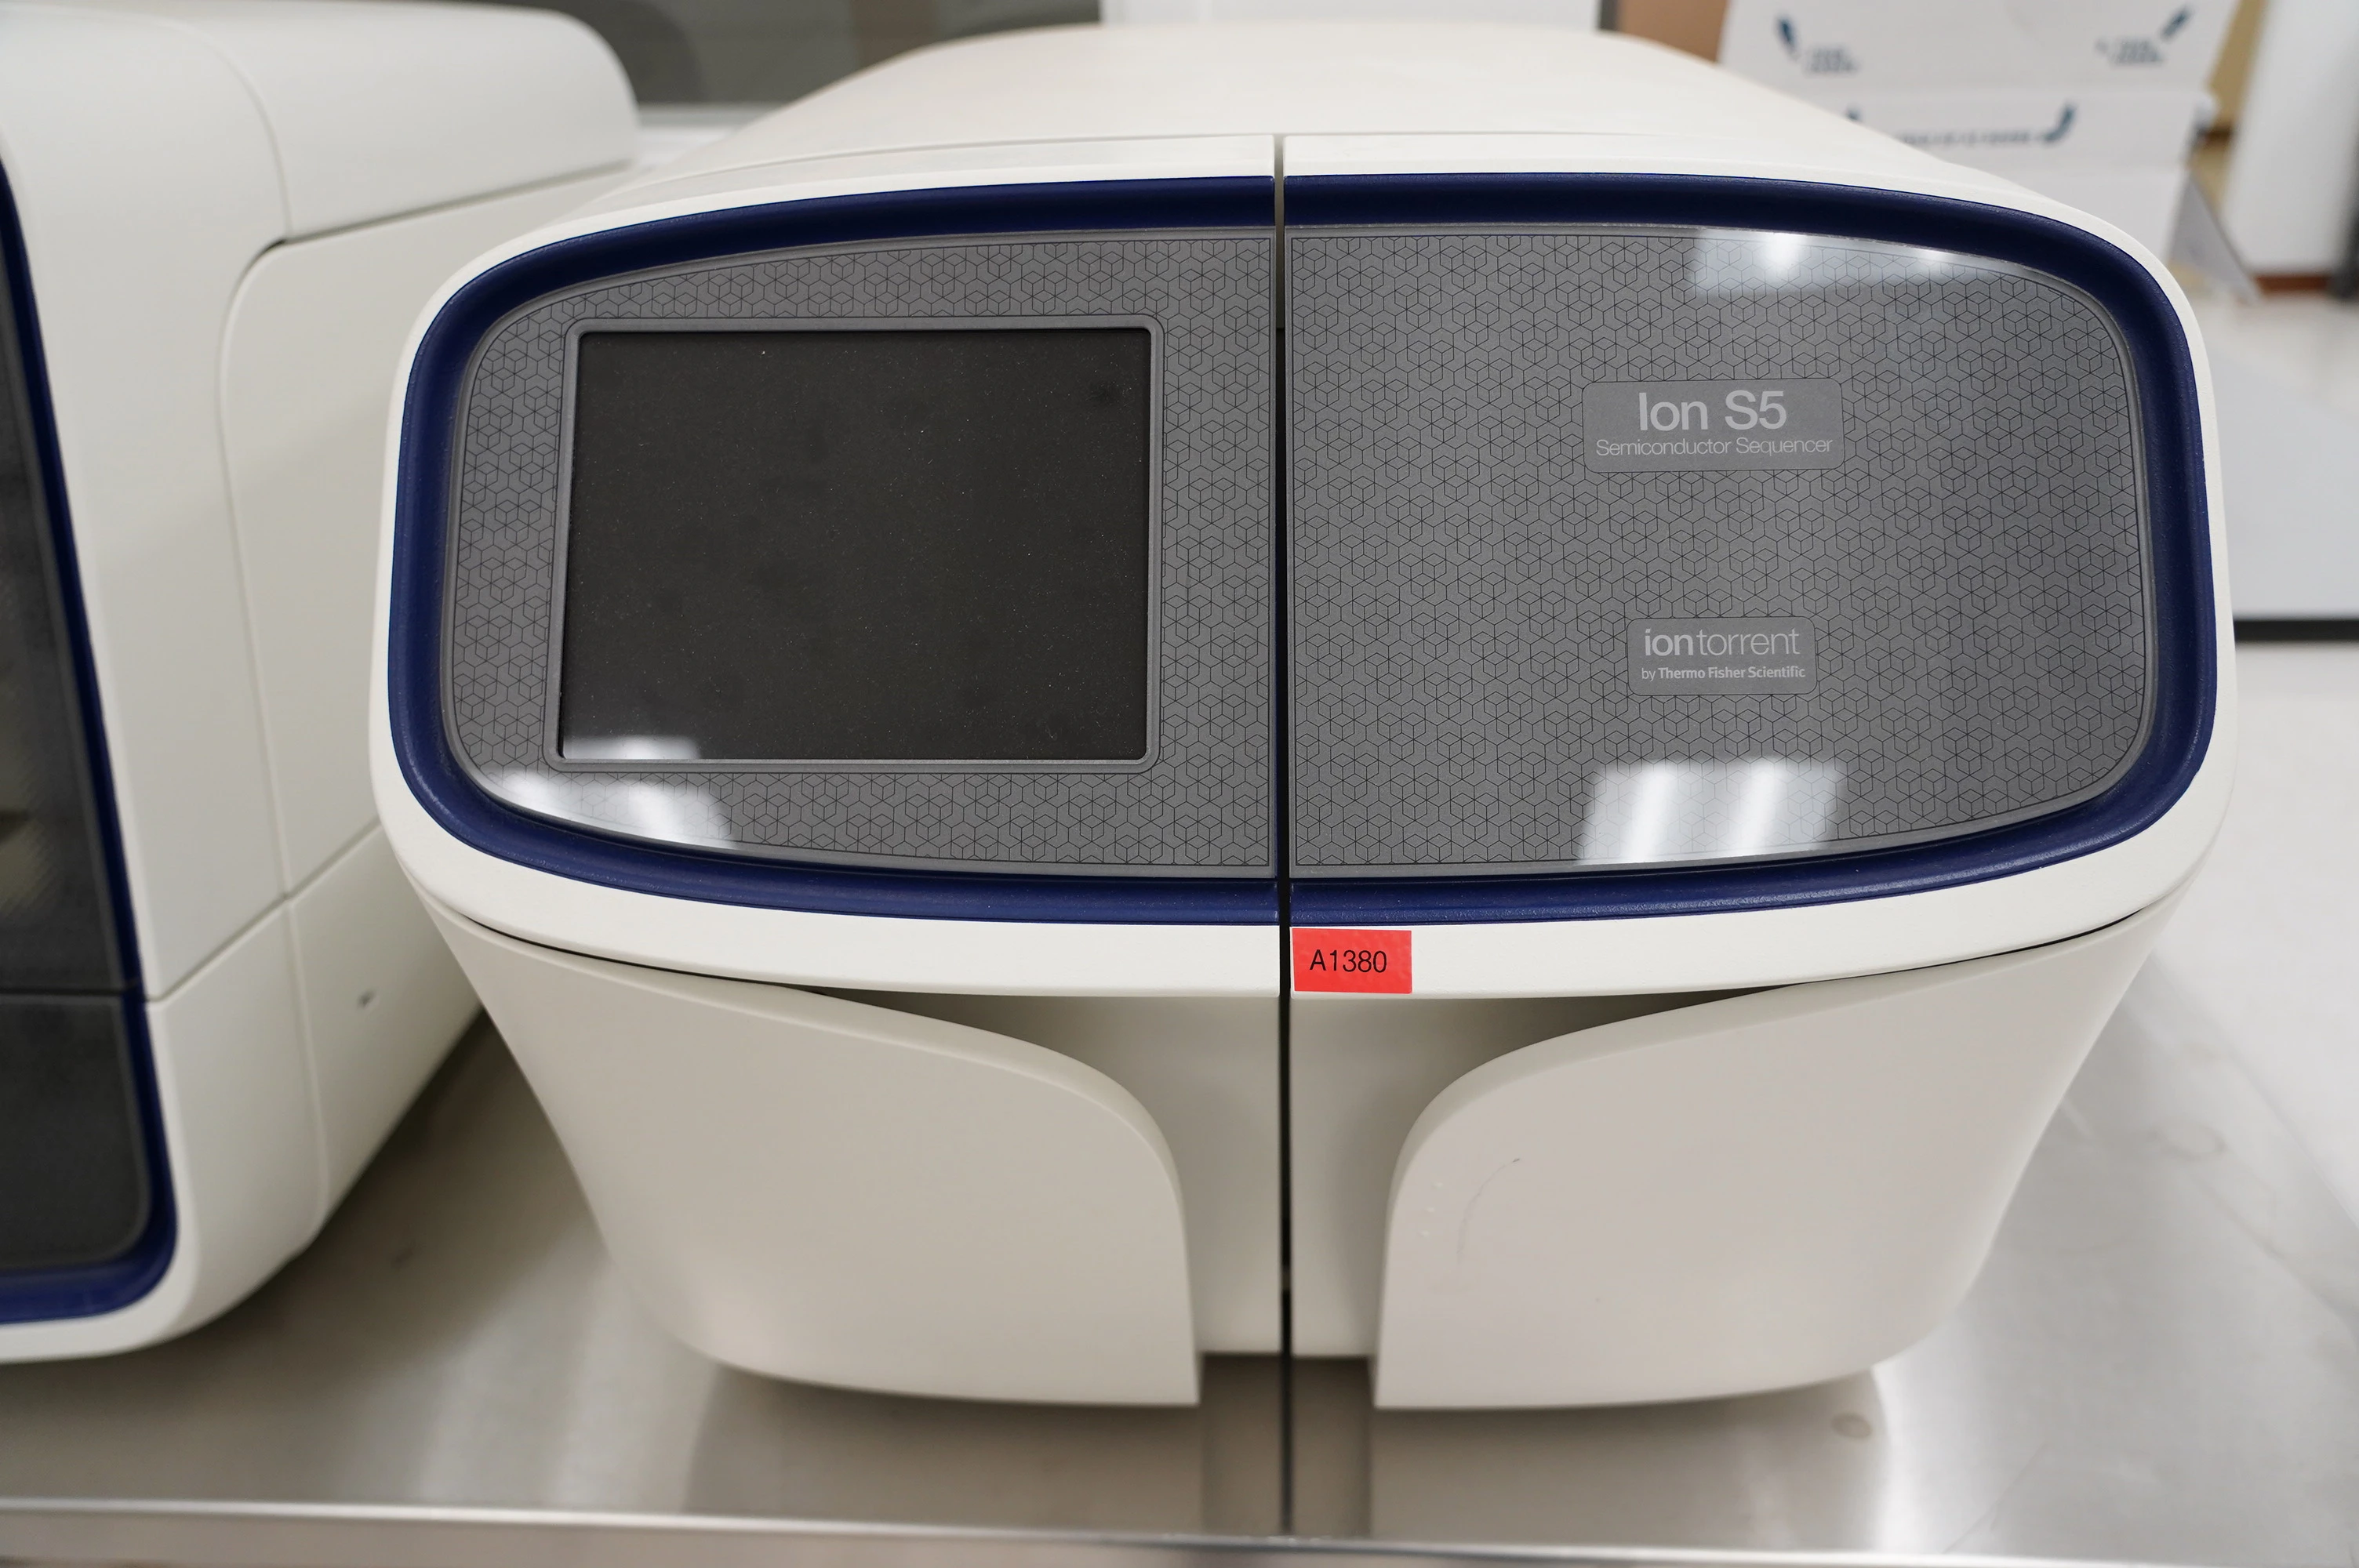 2015 THERMO FISHER SCIENTIFIC ION TORRENT ION S5 RNA/DNA SEQUENCER